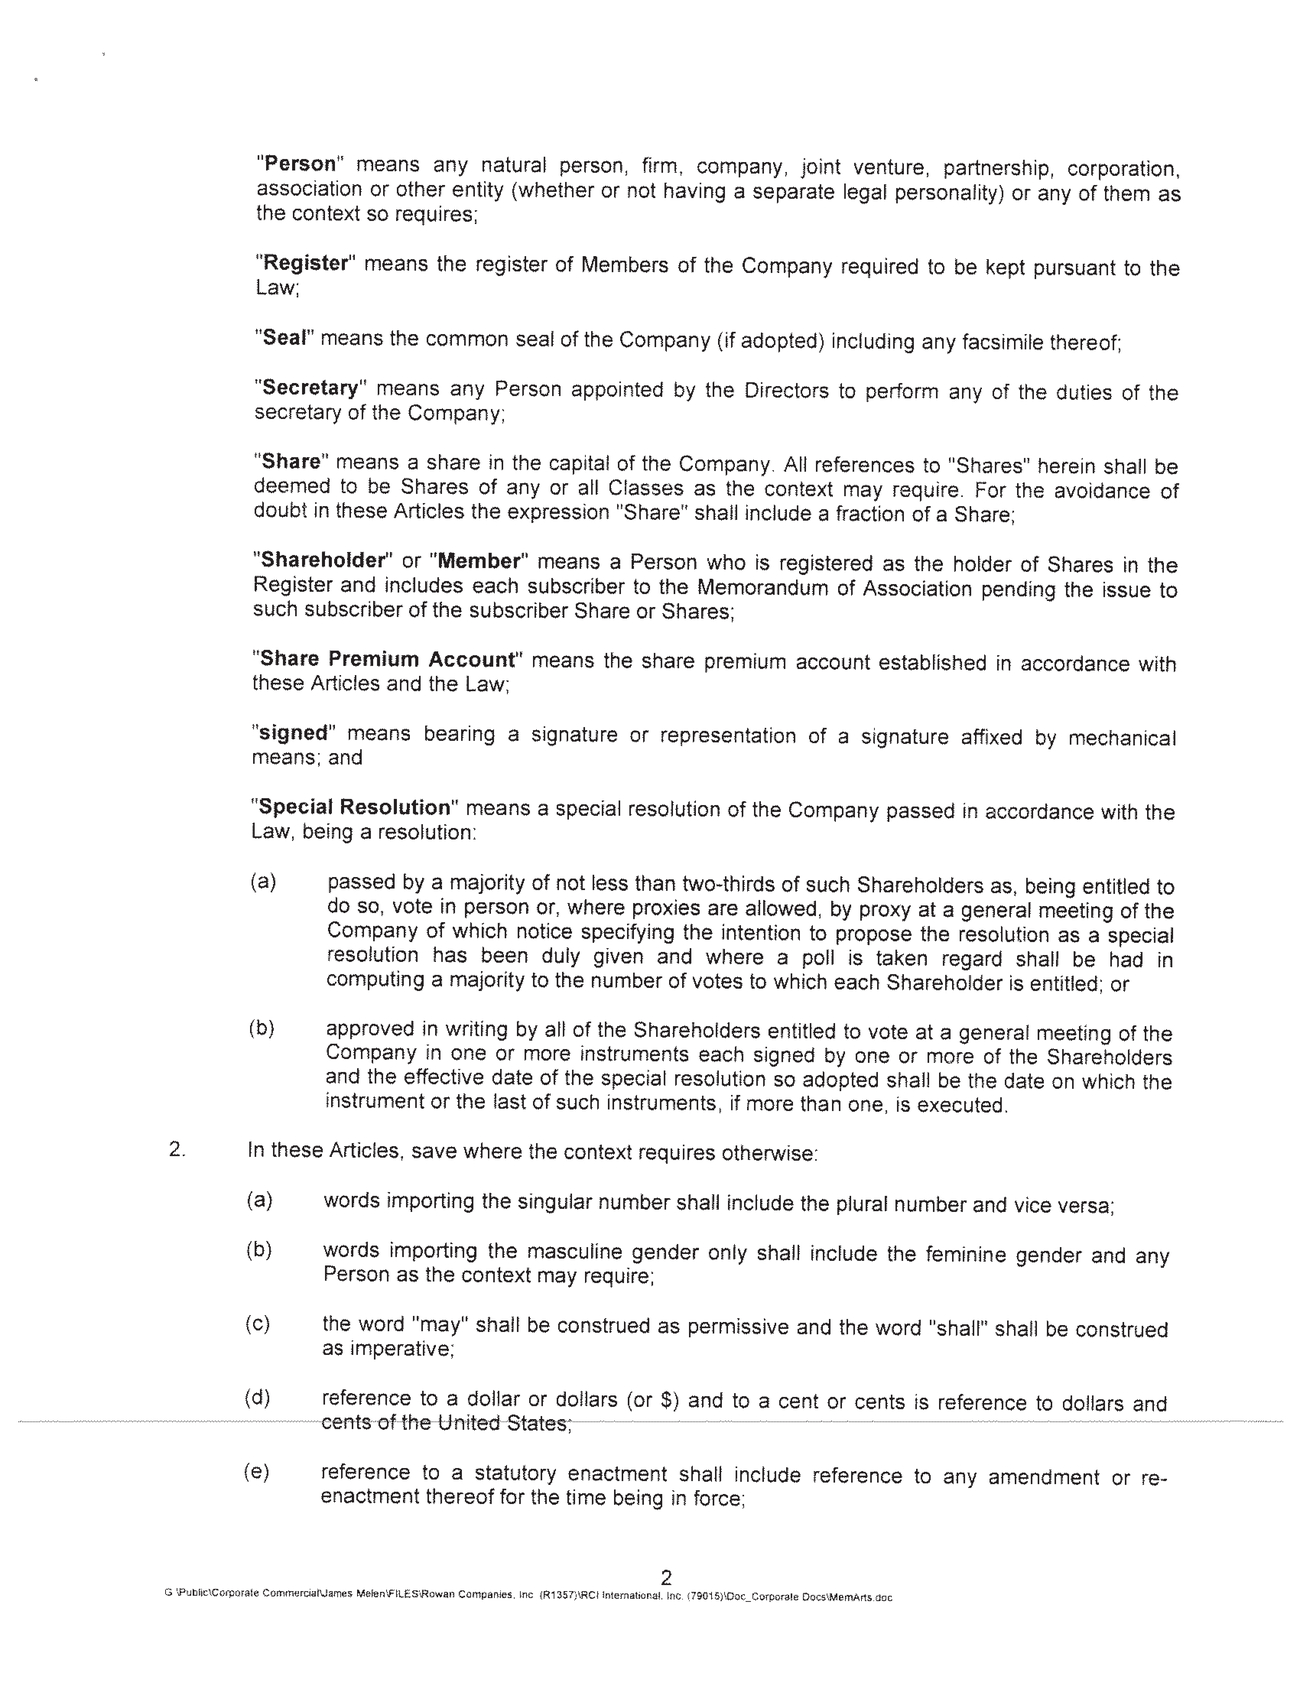 New Microsoft Word Document - Copy_page003page020page001 memorandum and articles of association of rci international inc_page007.jpg